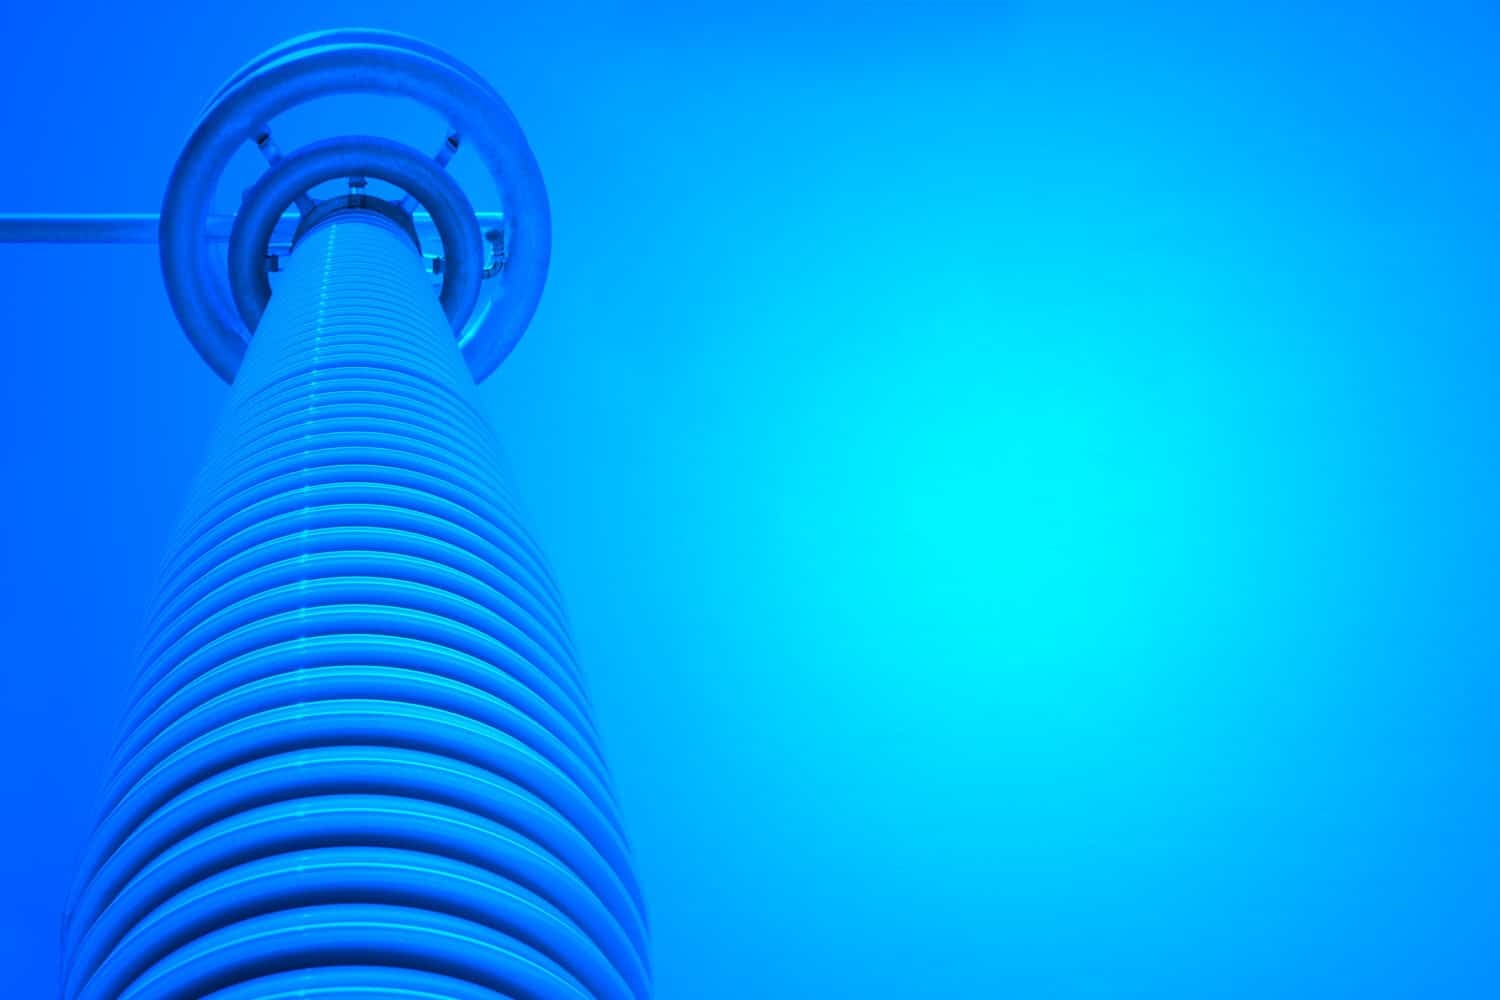 High voltage insulator for a hvdc power transmission in a blue background.